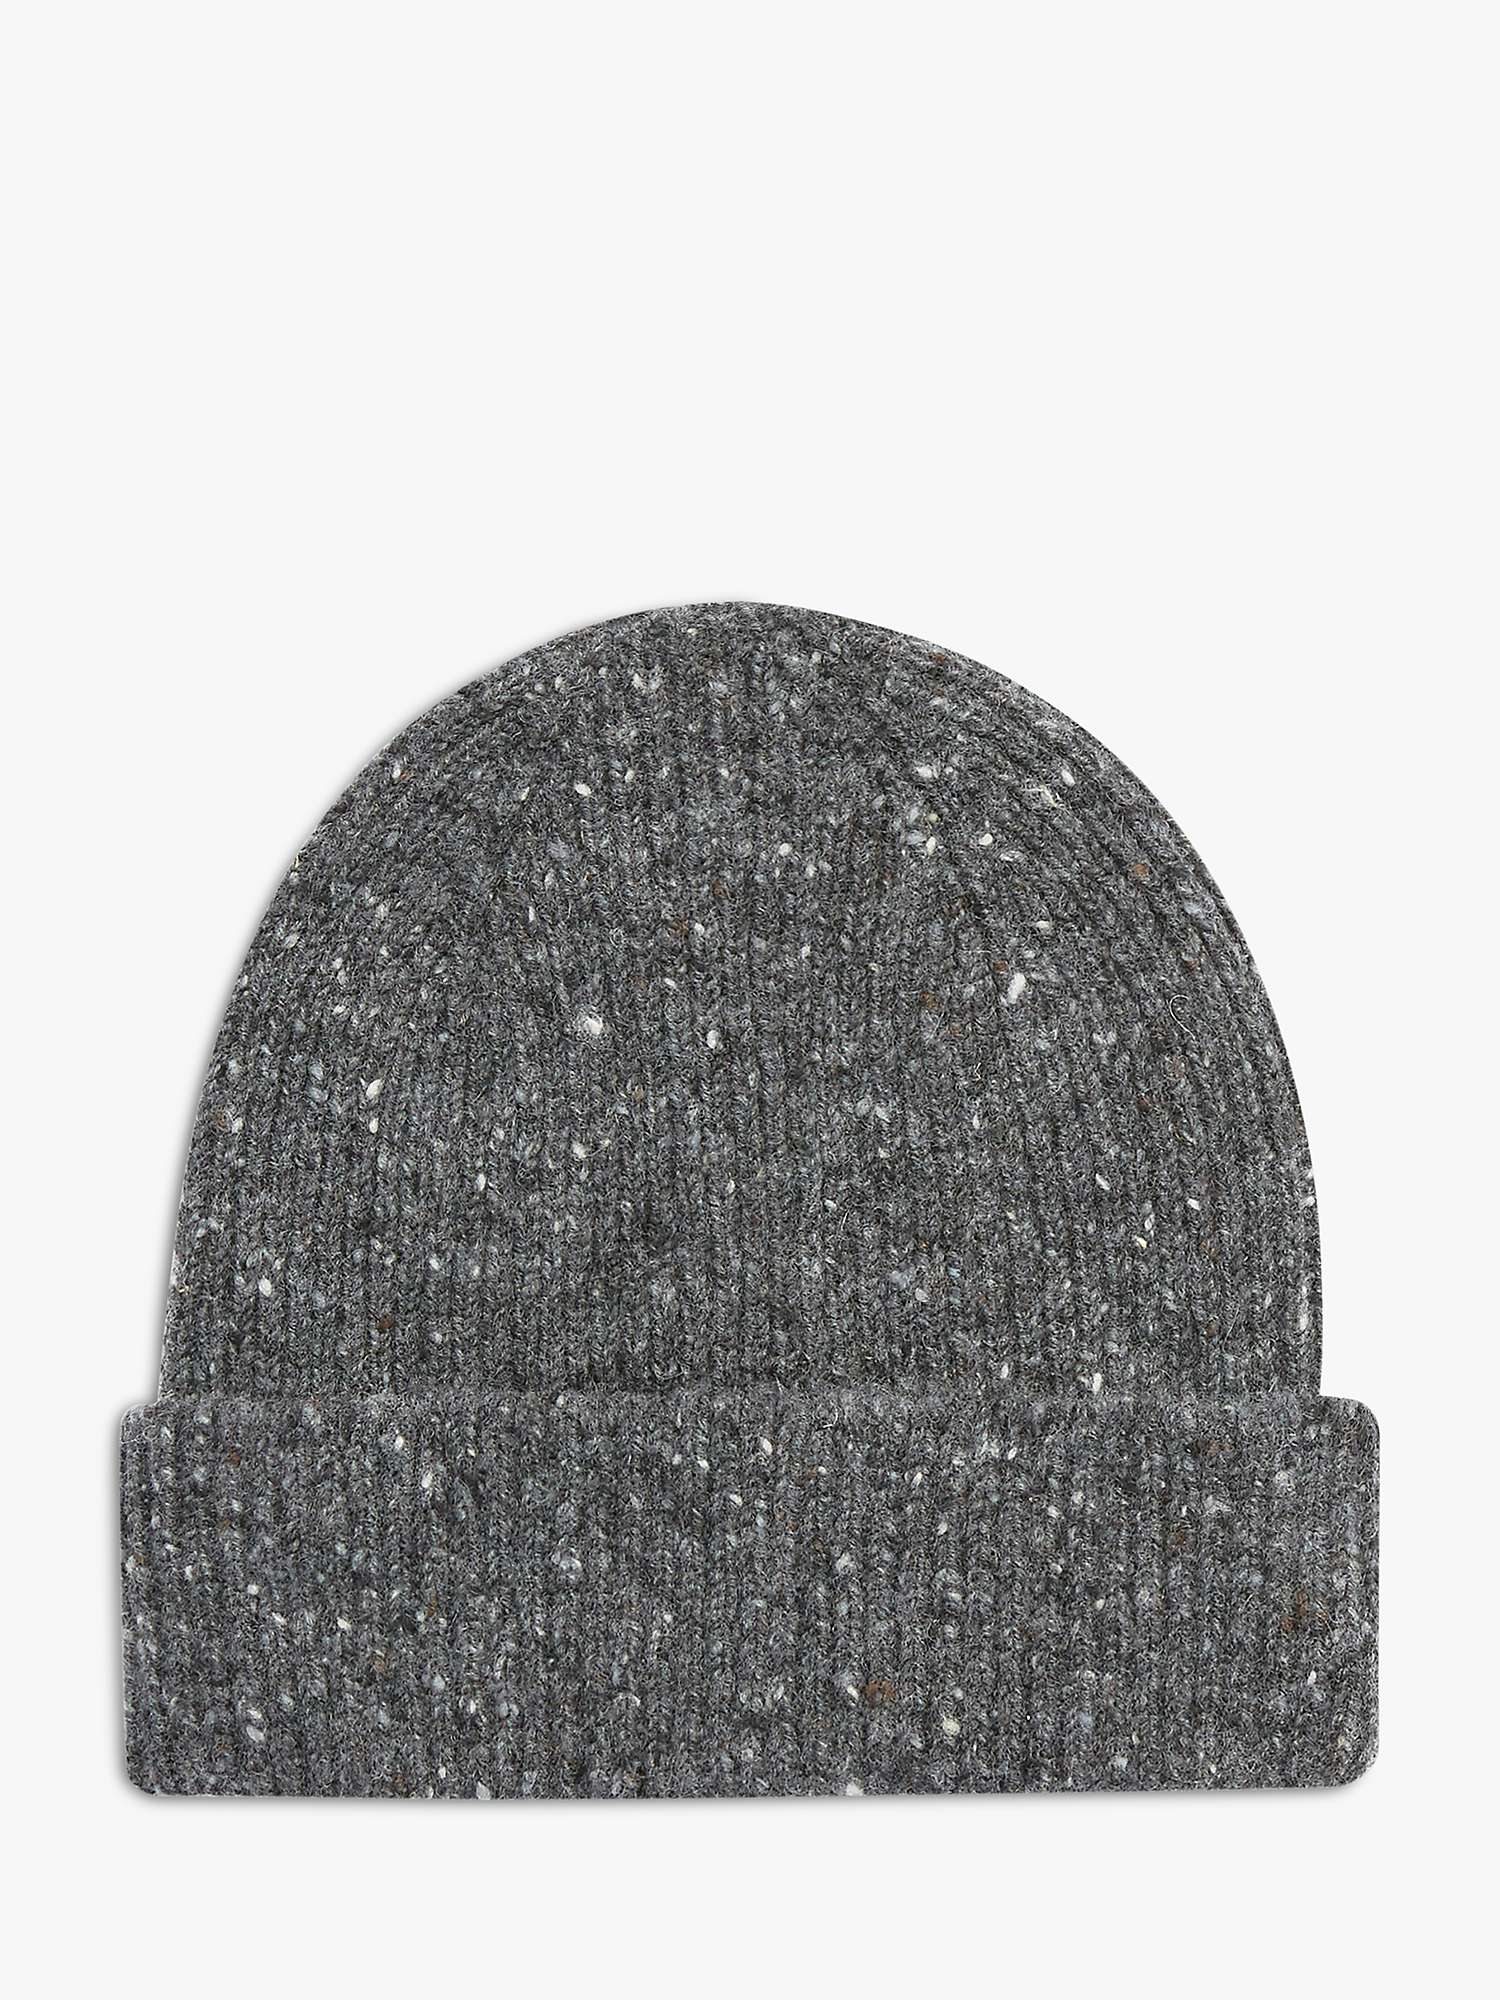 Buy Celtic & Co. Unisex Donegal Wool Beanie Hat, Charcoal Online at johnlewis.com